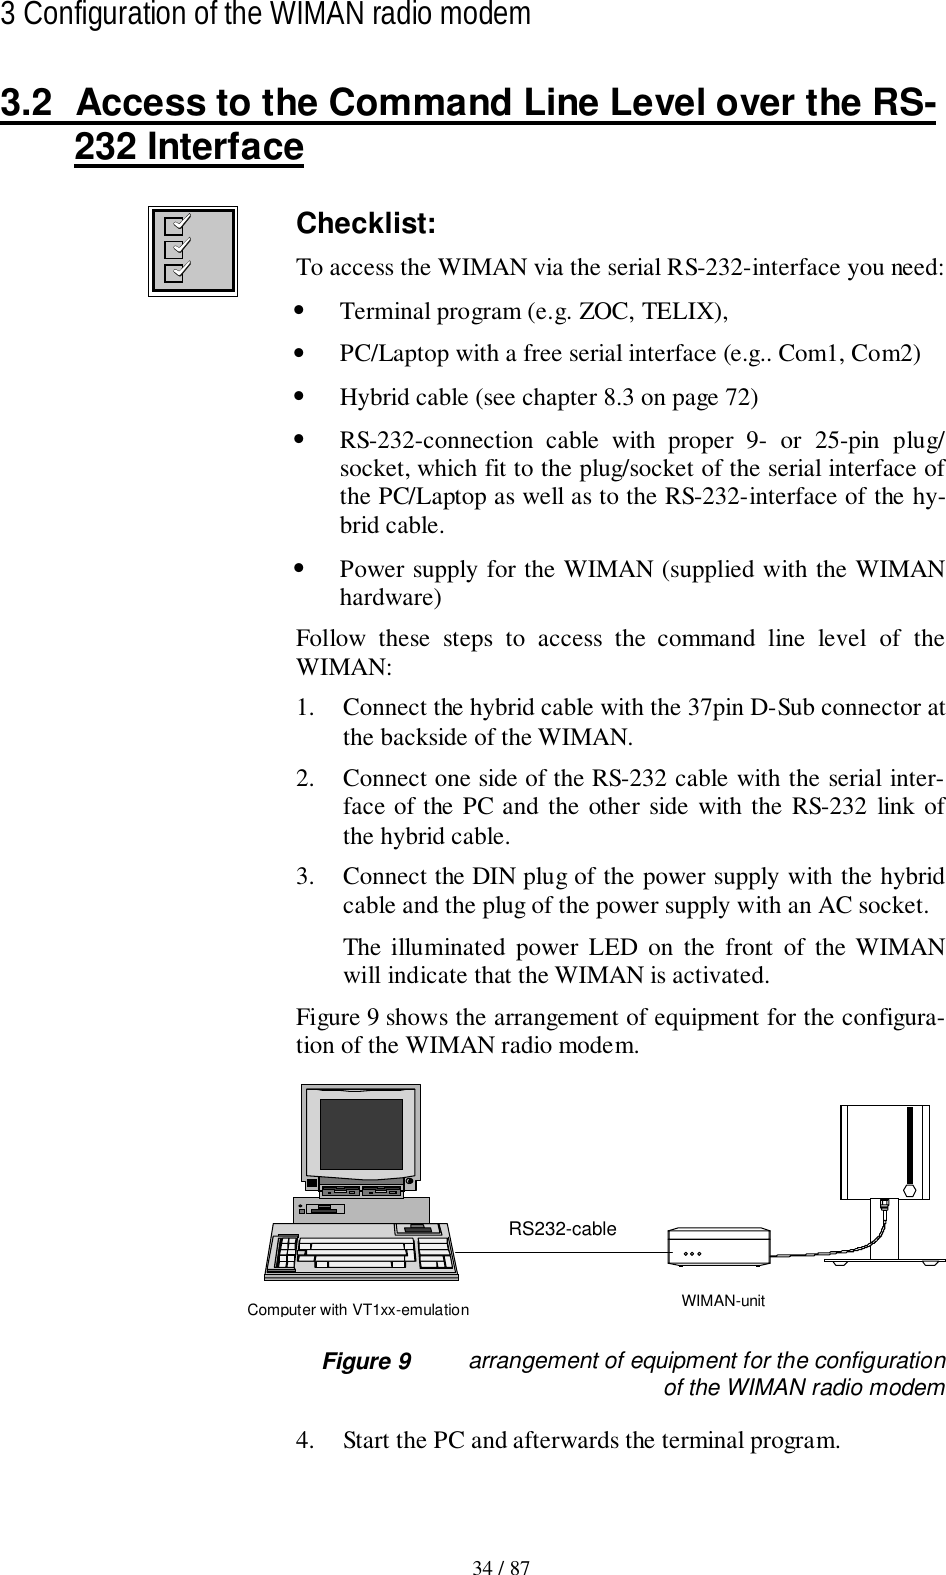 34 / 873 Configuration of the WIMAN radio modem3.2  Access to the Command Line Level over the RS-232 InterfaceChecklist:To access the WIMAN via the serial RS-232-interface you need:• Terminal program (e.g. ZOC, TELIX),• PC/Laptop with a free serial interface (e.g.. Com1, Com2)• Hybrid cable (see chapter 8.3 on page 72)• RS-232-connection cable with proper 9- or 25-pin plug/socket, which fit to the plug/socket of the serial interface ofthe PC/Laptop as well as to the RS-232-interface of the hy-brid cable.• Power supply for the WIMAN (supplied with the WIMANhardware)Follow these steps to access the command line level of theWIMAN:1. Connect the hybrid cable with the 37pin D-Sub connector atthe backside of the WIMAN.2. Connect one side of the RS-232 cable with the serial inter-face of the PC and the other side with the RS-232 link ofthe hybrid cable.3. Connect the DIN plug of the power supply with the hybridcable and the plug of the power supply with an AC socket.The illuminated power LED on the front of the WIMANwill indicate that the WIMAN is activated.Figure 9 shows the arrangement of equipment for the configura-tion of the WIMAN radio modem.RS232-cableWIMAN-unitComputer with VT1xx-emulation Figure 9 arrangement of equipment for the configurationof the WIMAN radio modem4. Start the PC and afterwards the terminal program.